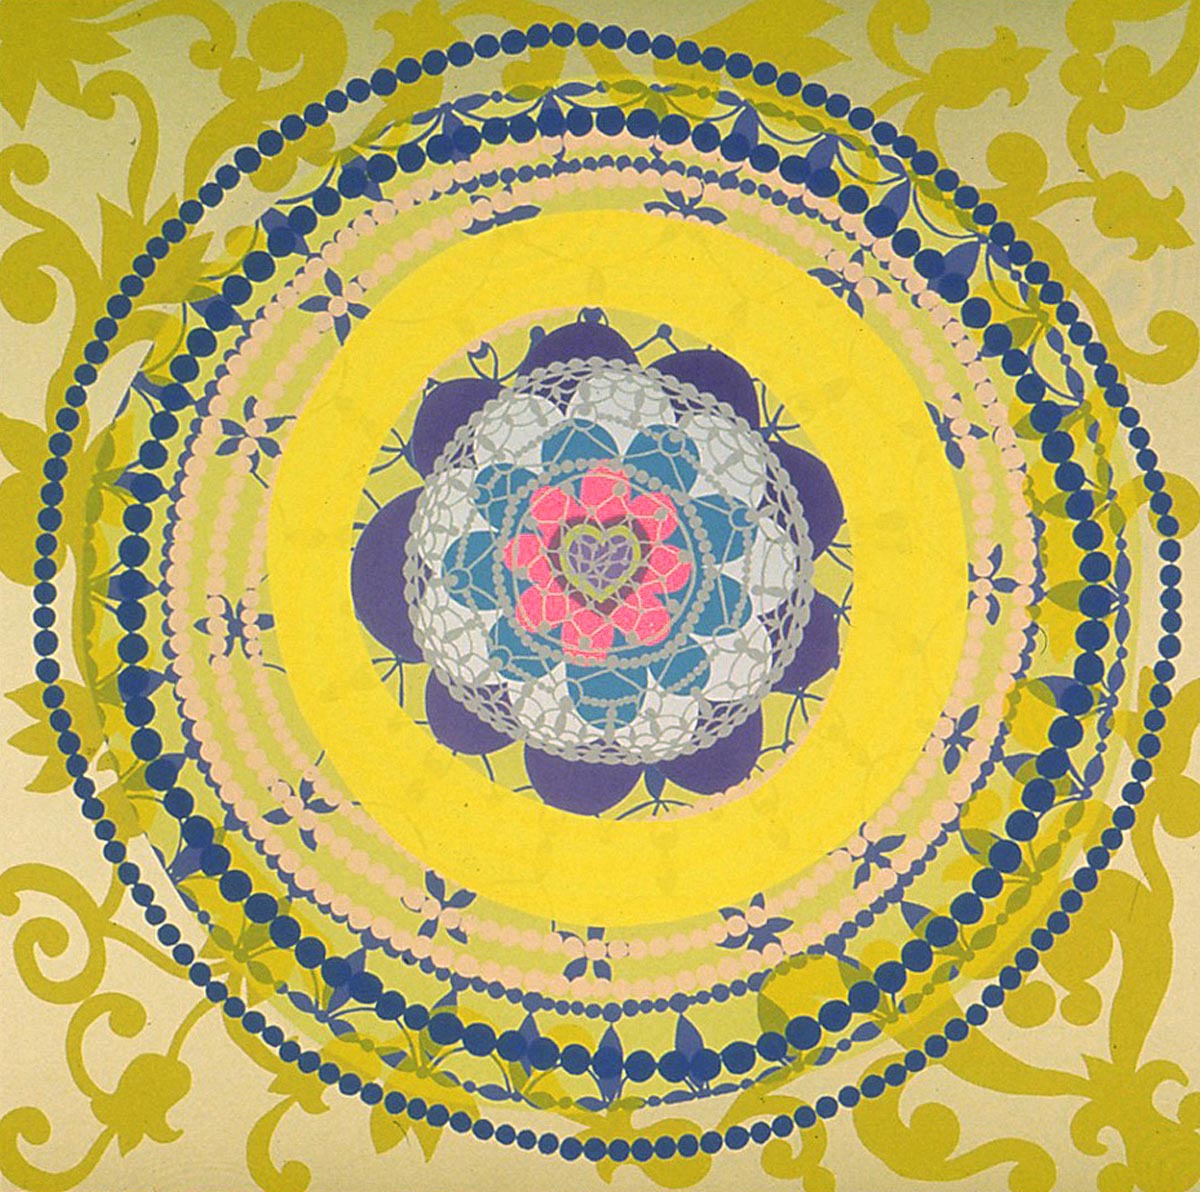 A brightly-colored artwork employs flowers and intricate patterns to create a kaleidoscopic effect. 